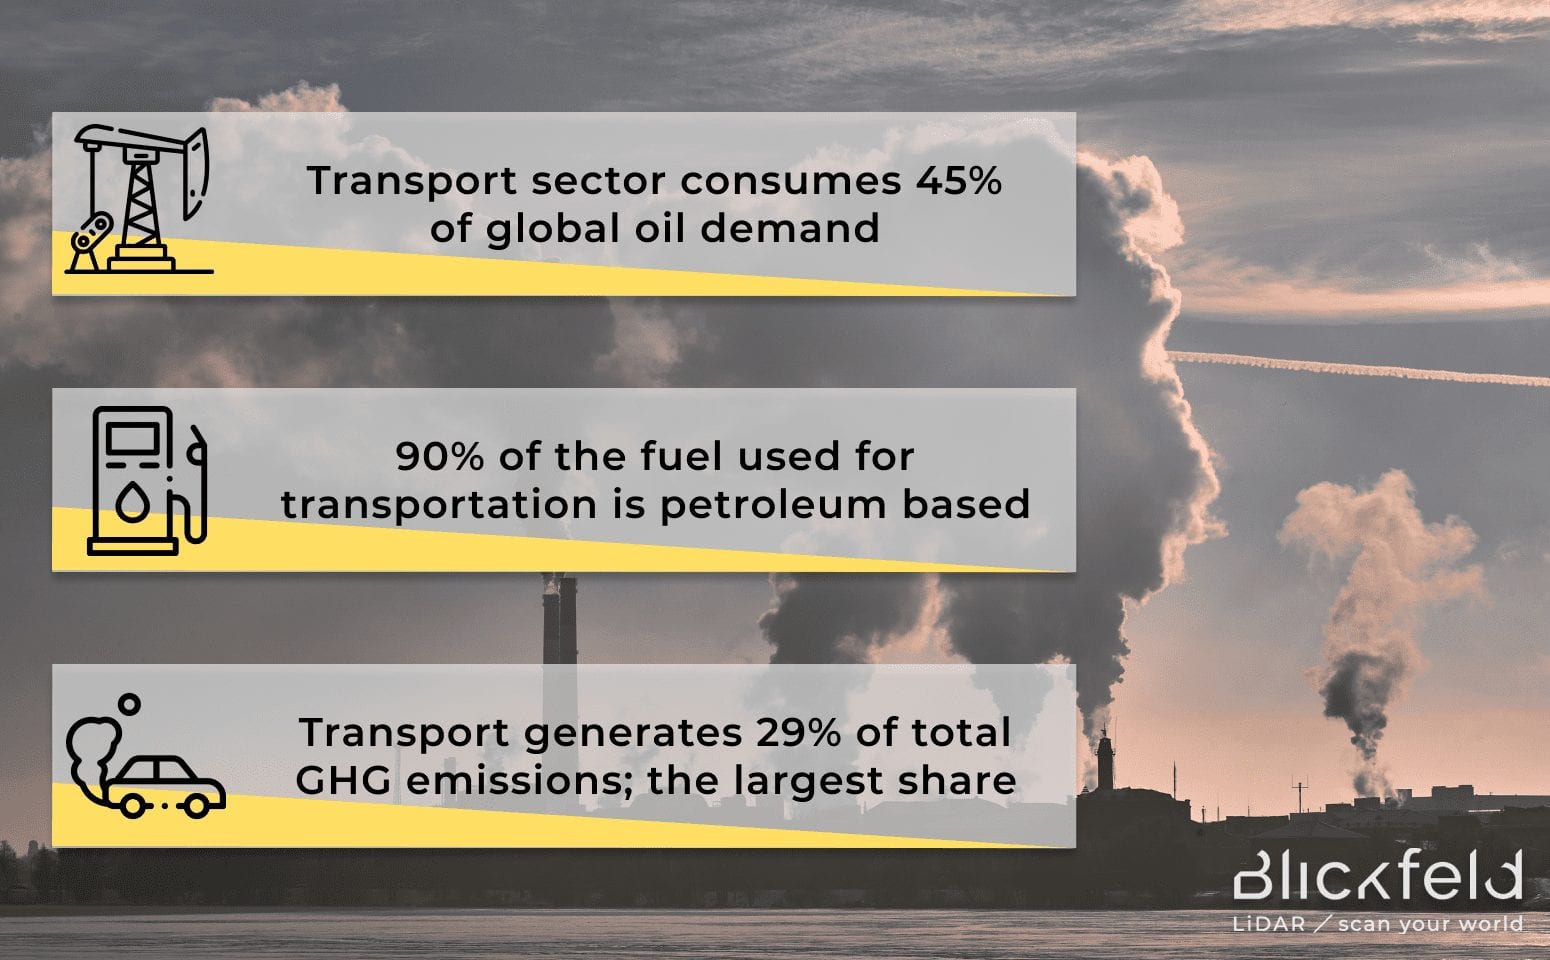 Statistics on the transport sector and environmental pollution